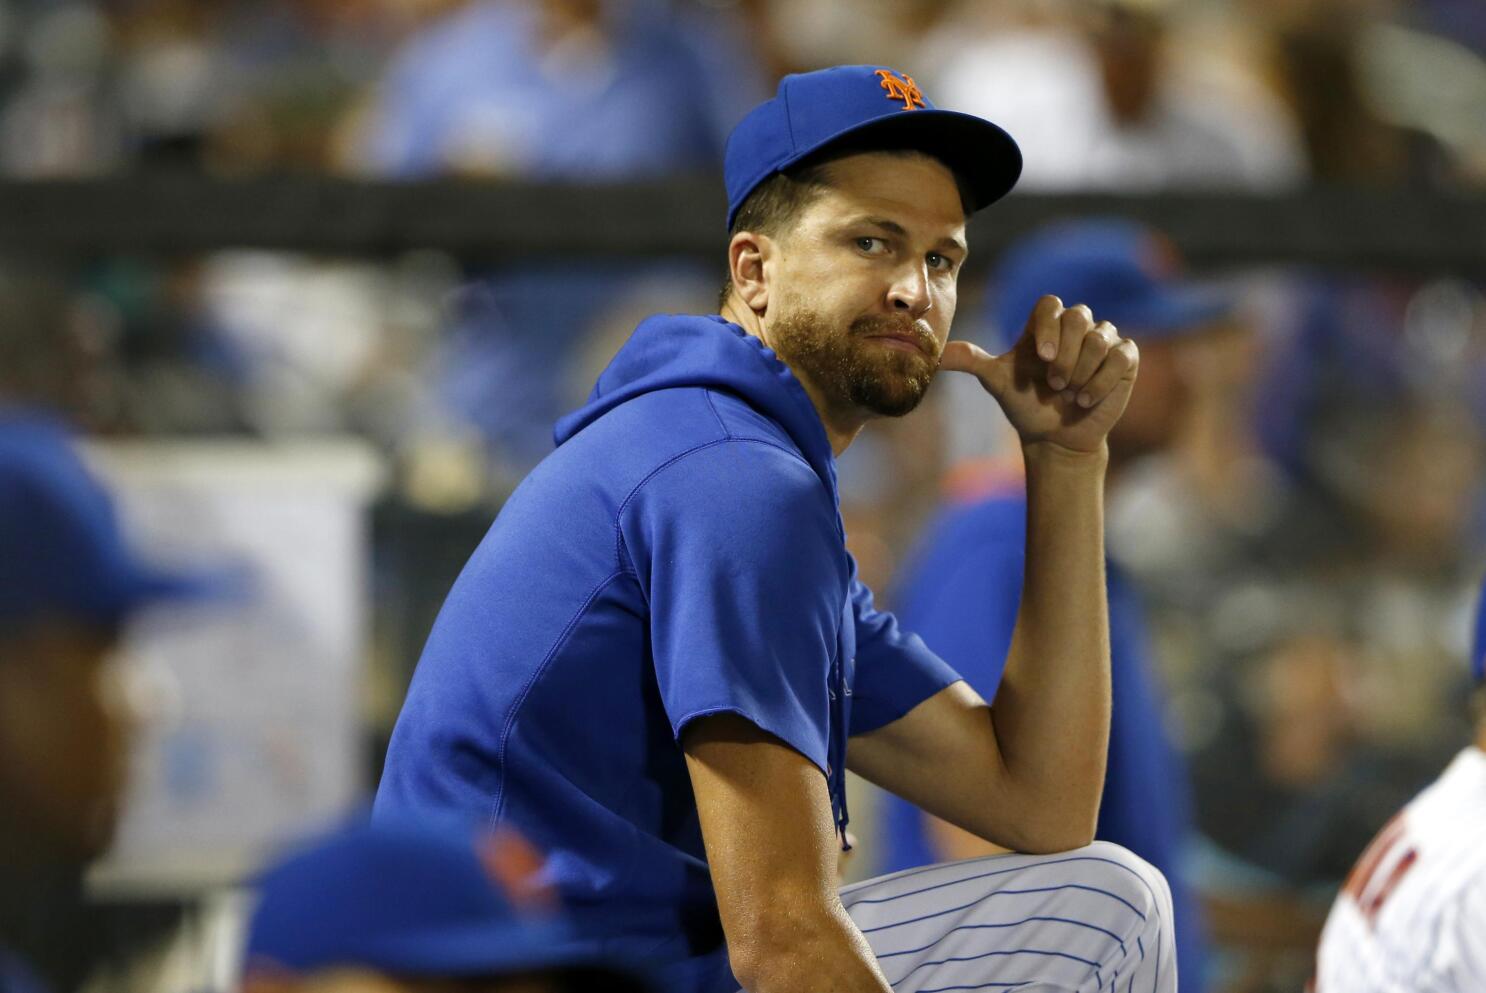 DeGrom resumes throwing, Syndergaard set for rehab stint